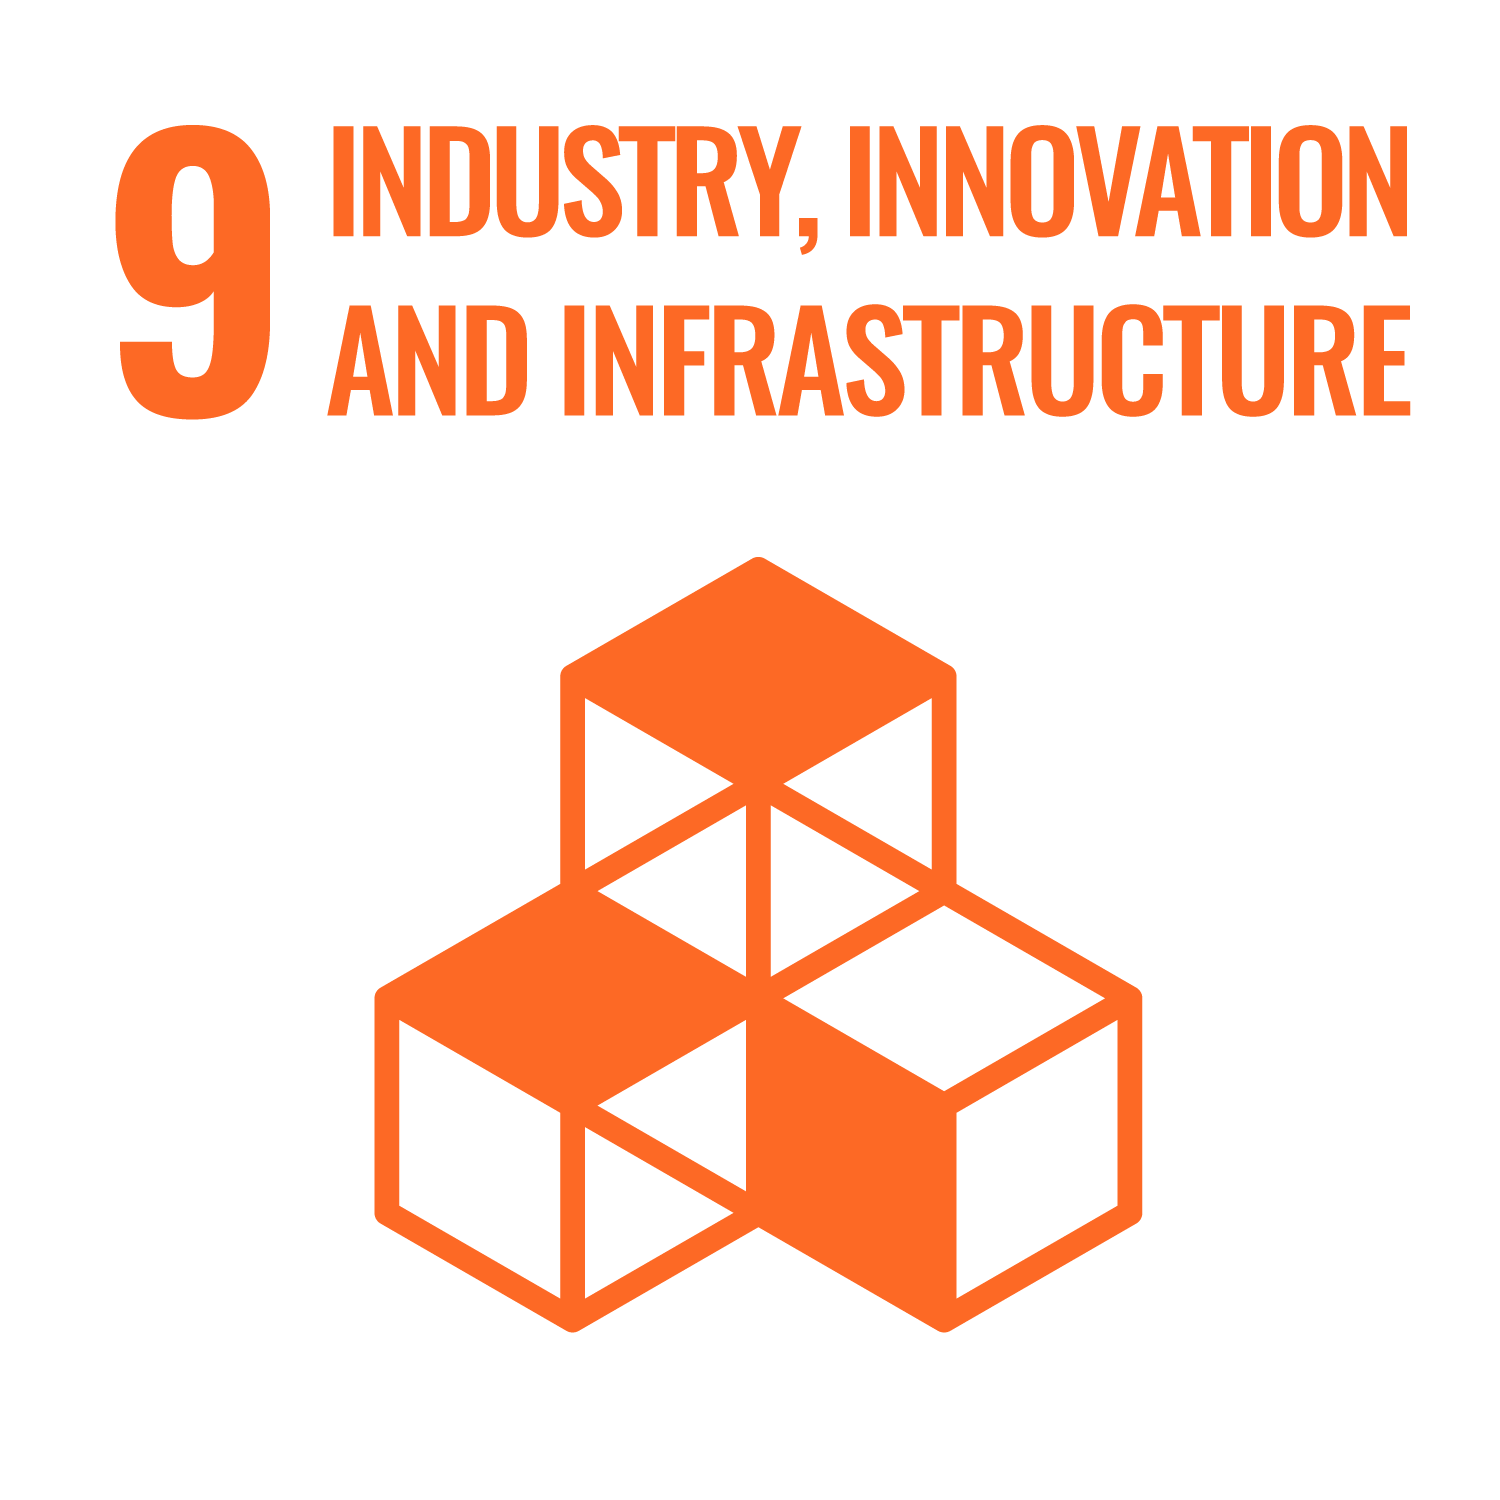 SDG9 Industry, Innovation and Infrastructure